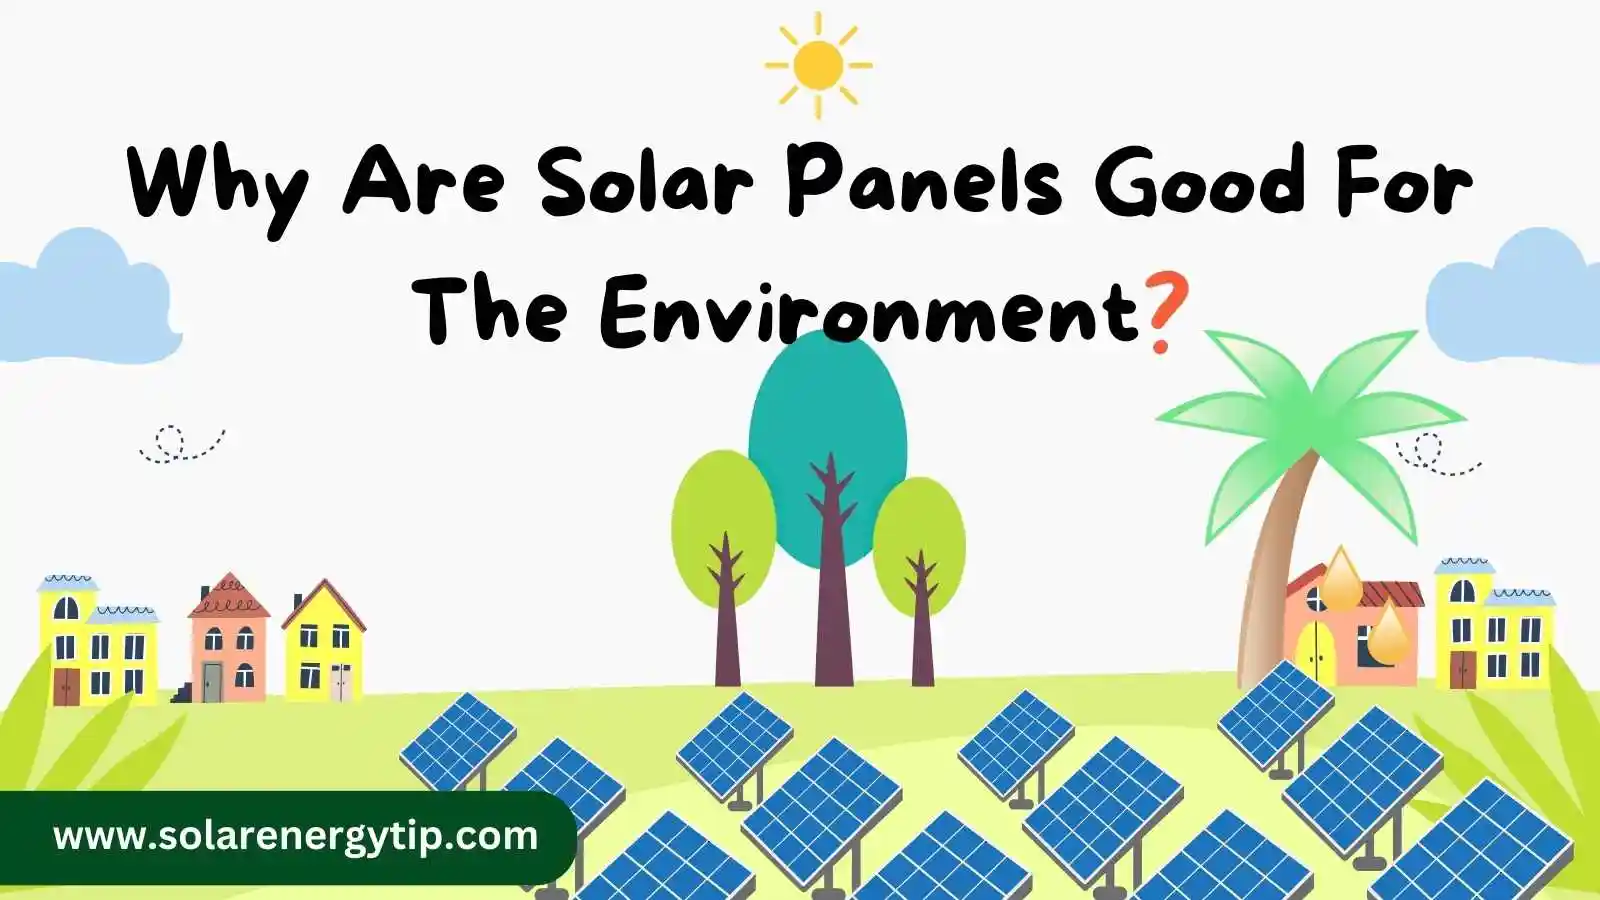 Why Are Solar Panels Good for The Environment